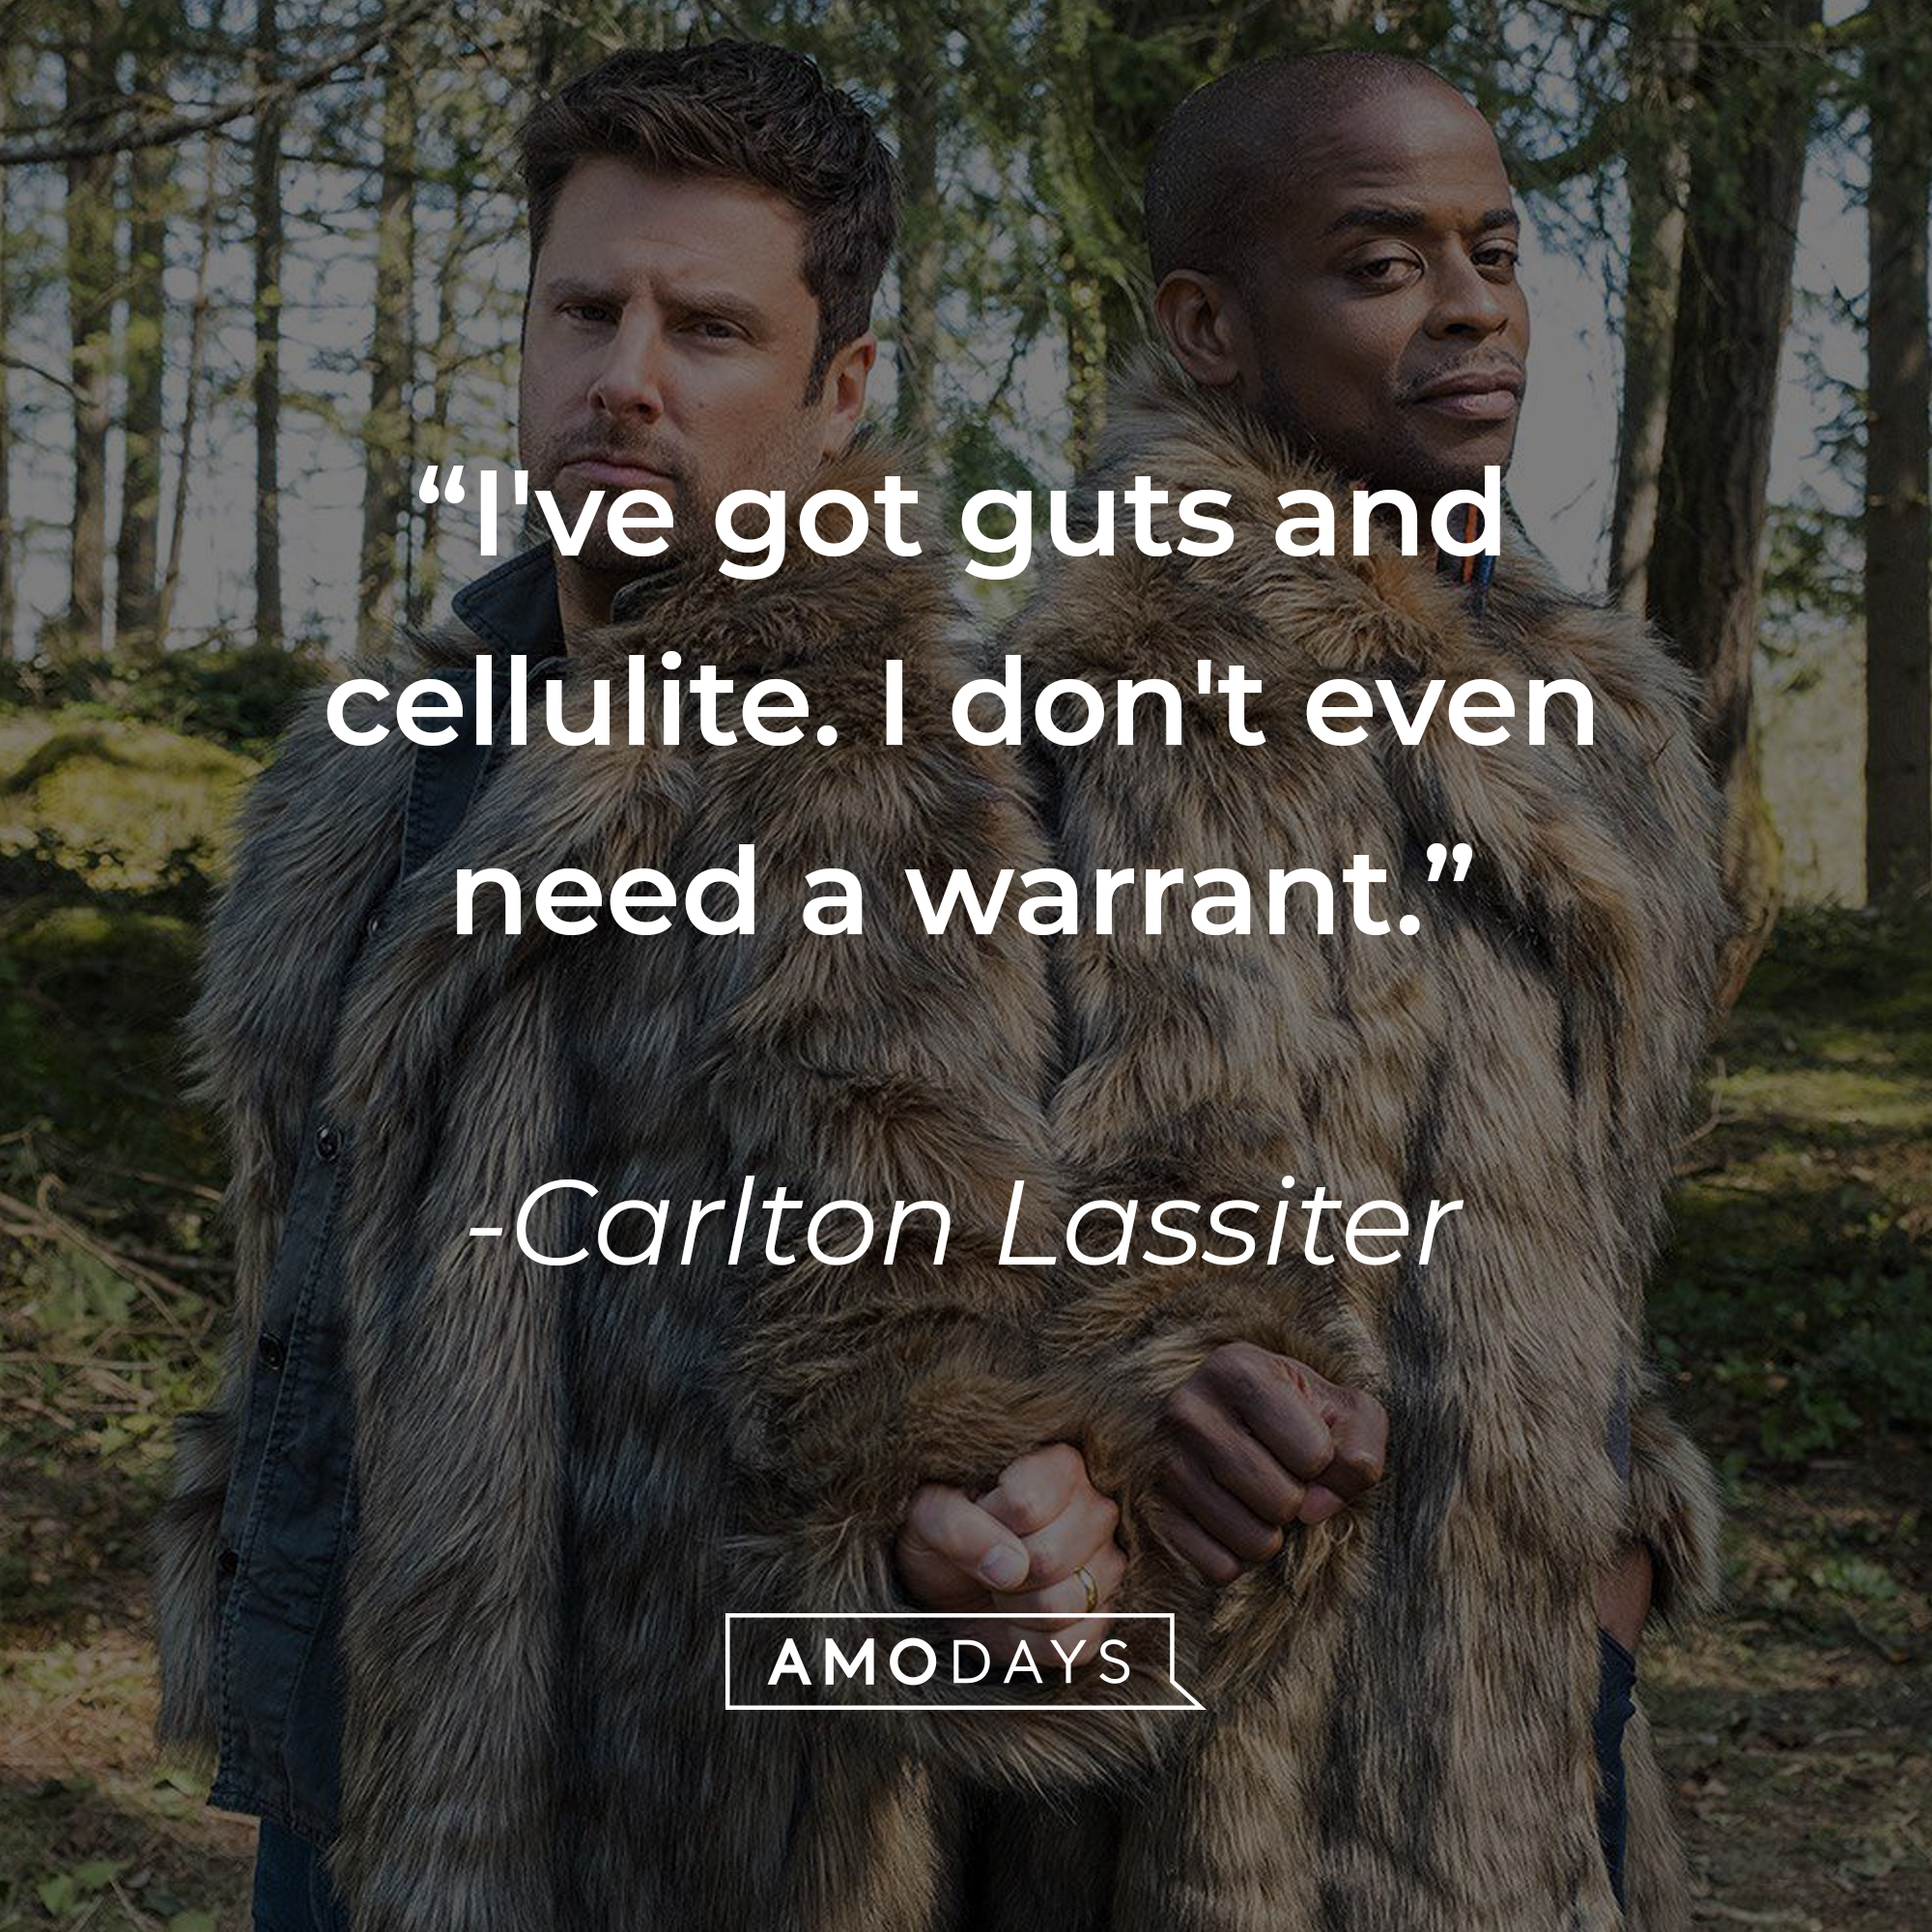 Shawn Spencer, with Carlton Lassiter’s  quote: “I've got guts and cellulite. I don't even need a warrant." | Source: facebook.com/PsychPeacock